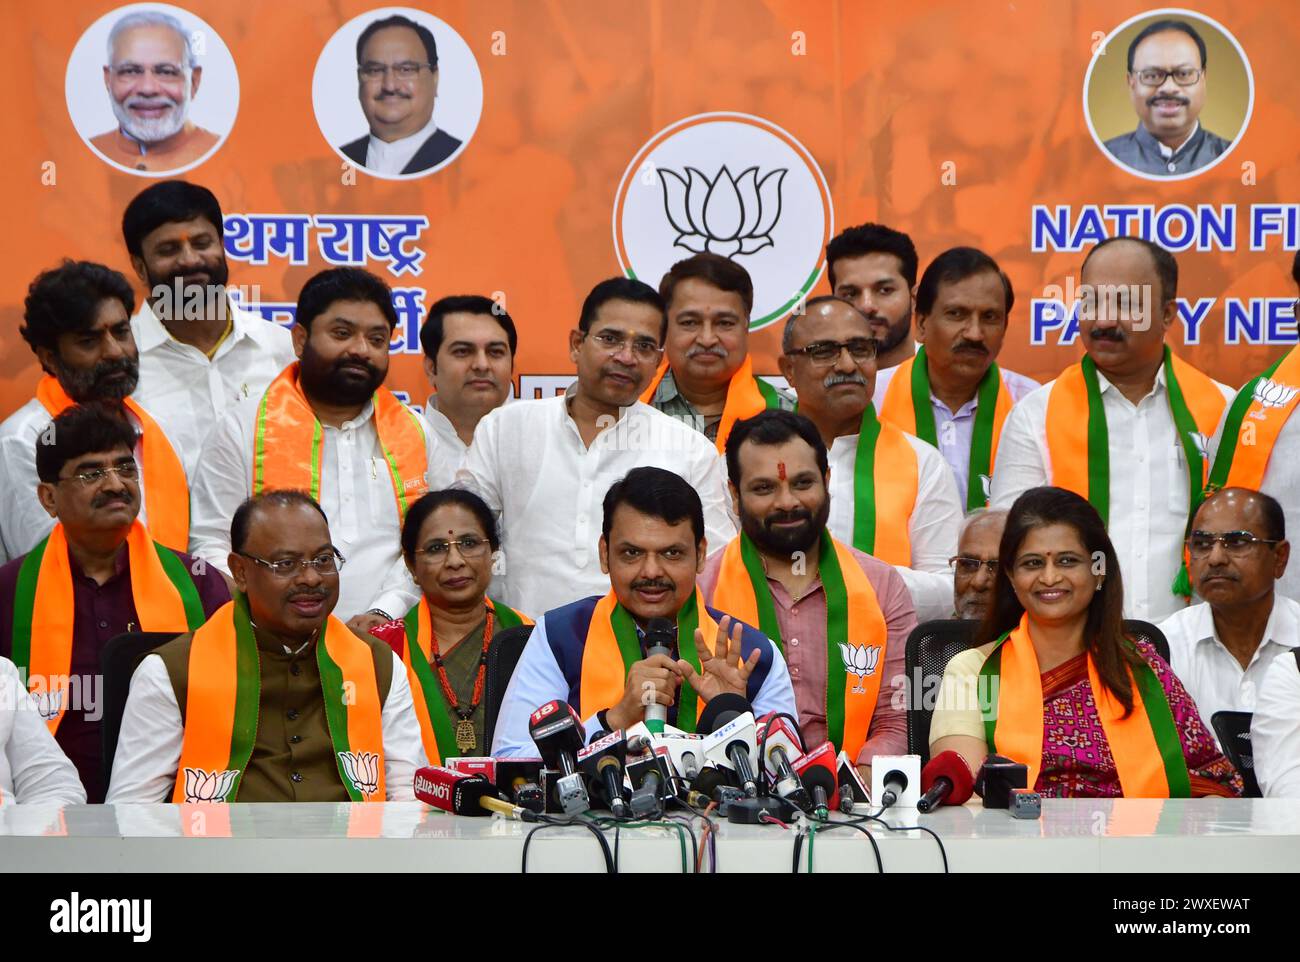 MUMBAI, INDIA - MARCH 30: Former Lok Sabha Speaker Shivraj Patil's daughter Archana Patil Chakurkar joins BJP in the presence of Maharashtra Dy CM Devendra Fadnavis and Maharashtra BJP President Chandrashekar Bawankule, on March 30, 2024 in Mumbai, India. Archana Patil said she has been associated with social work for the last two decades and decided to choose the BJP for politics. Shivraj Patil, who hails from Latur in Marathwada region of Maharashtra, was Union home minister during the UPA-I government, but stepped down in the wake of the 26/11 Mumbai terror attacks. (Photo by Bhushan Koyand Stock Photo